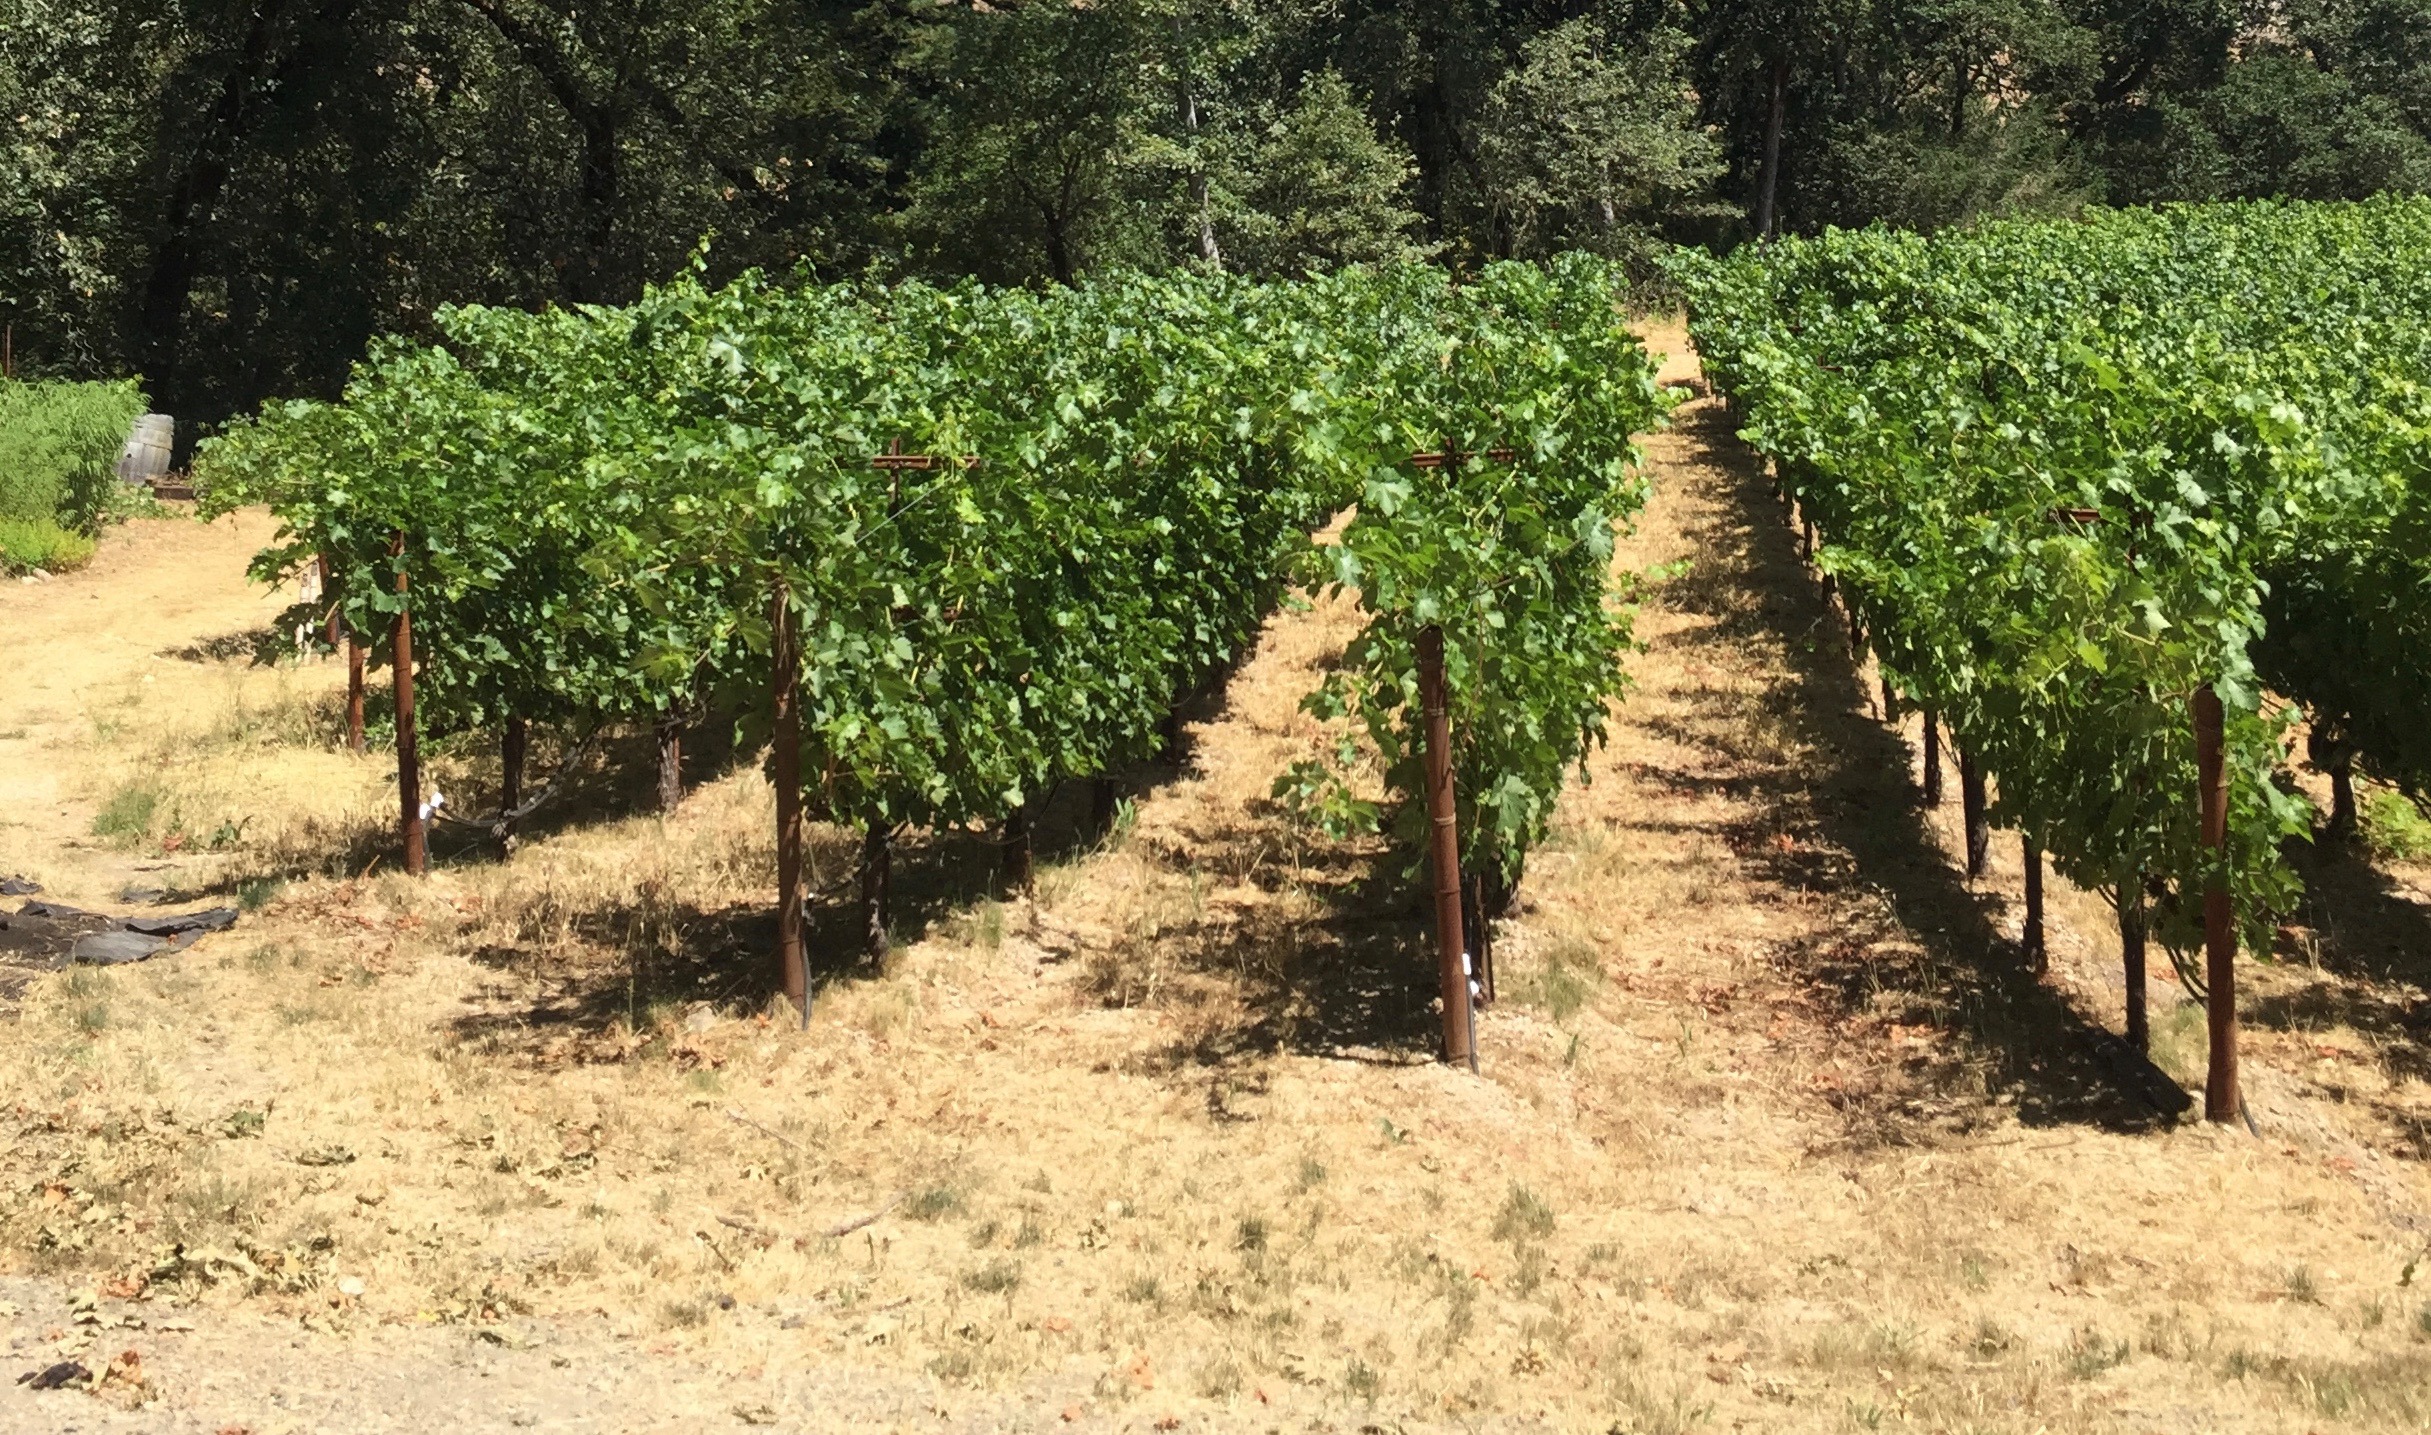 Dyer Wines’ Napa Valley Vineyard Switch to No-Till Farming